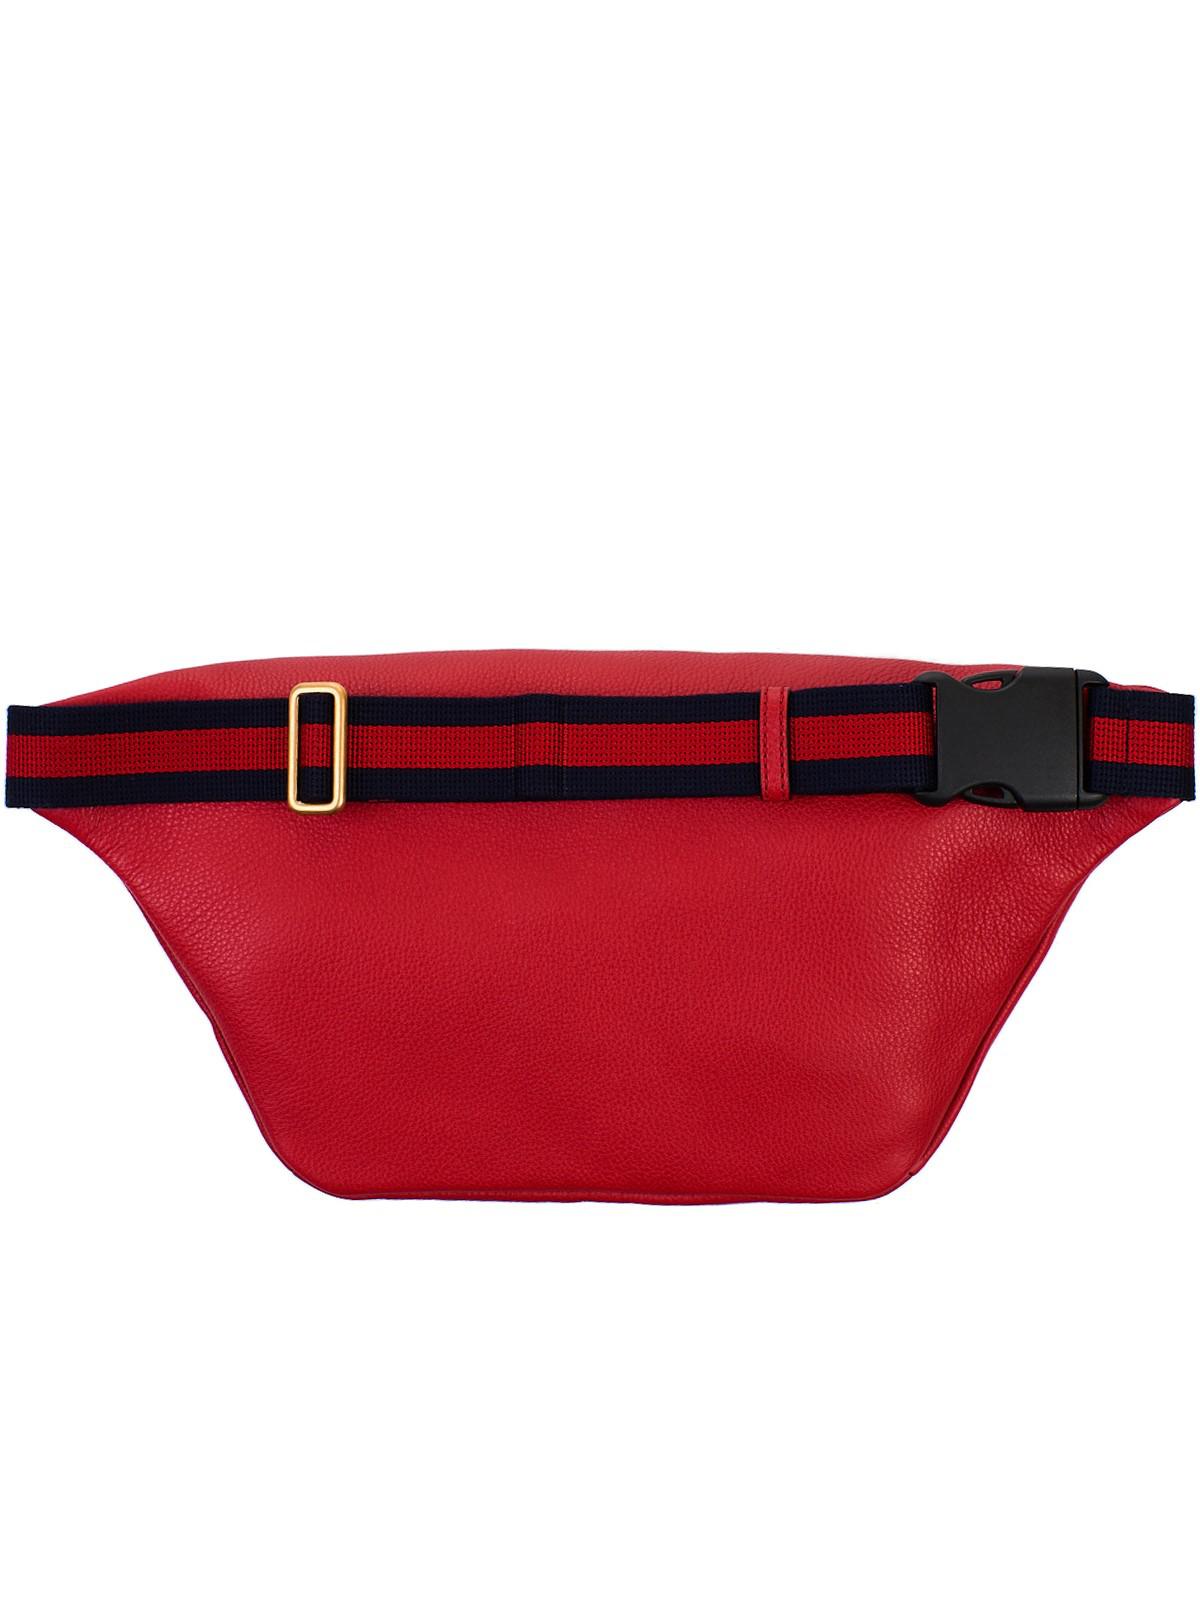 Gucci Leather Red Fanny Pack - Lyst